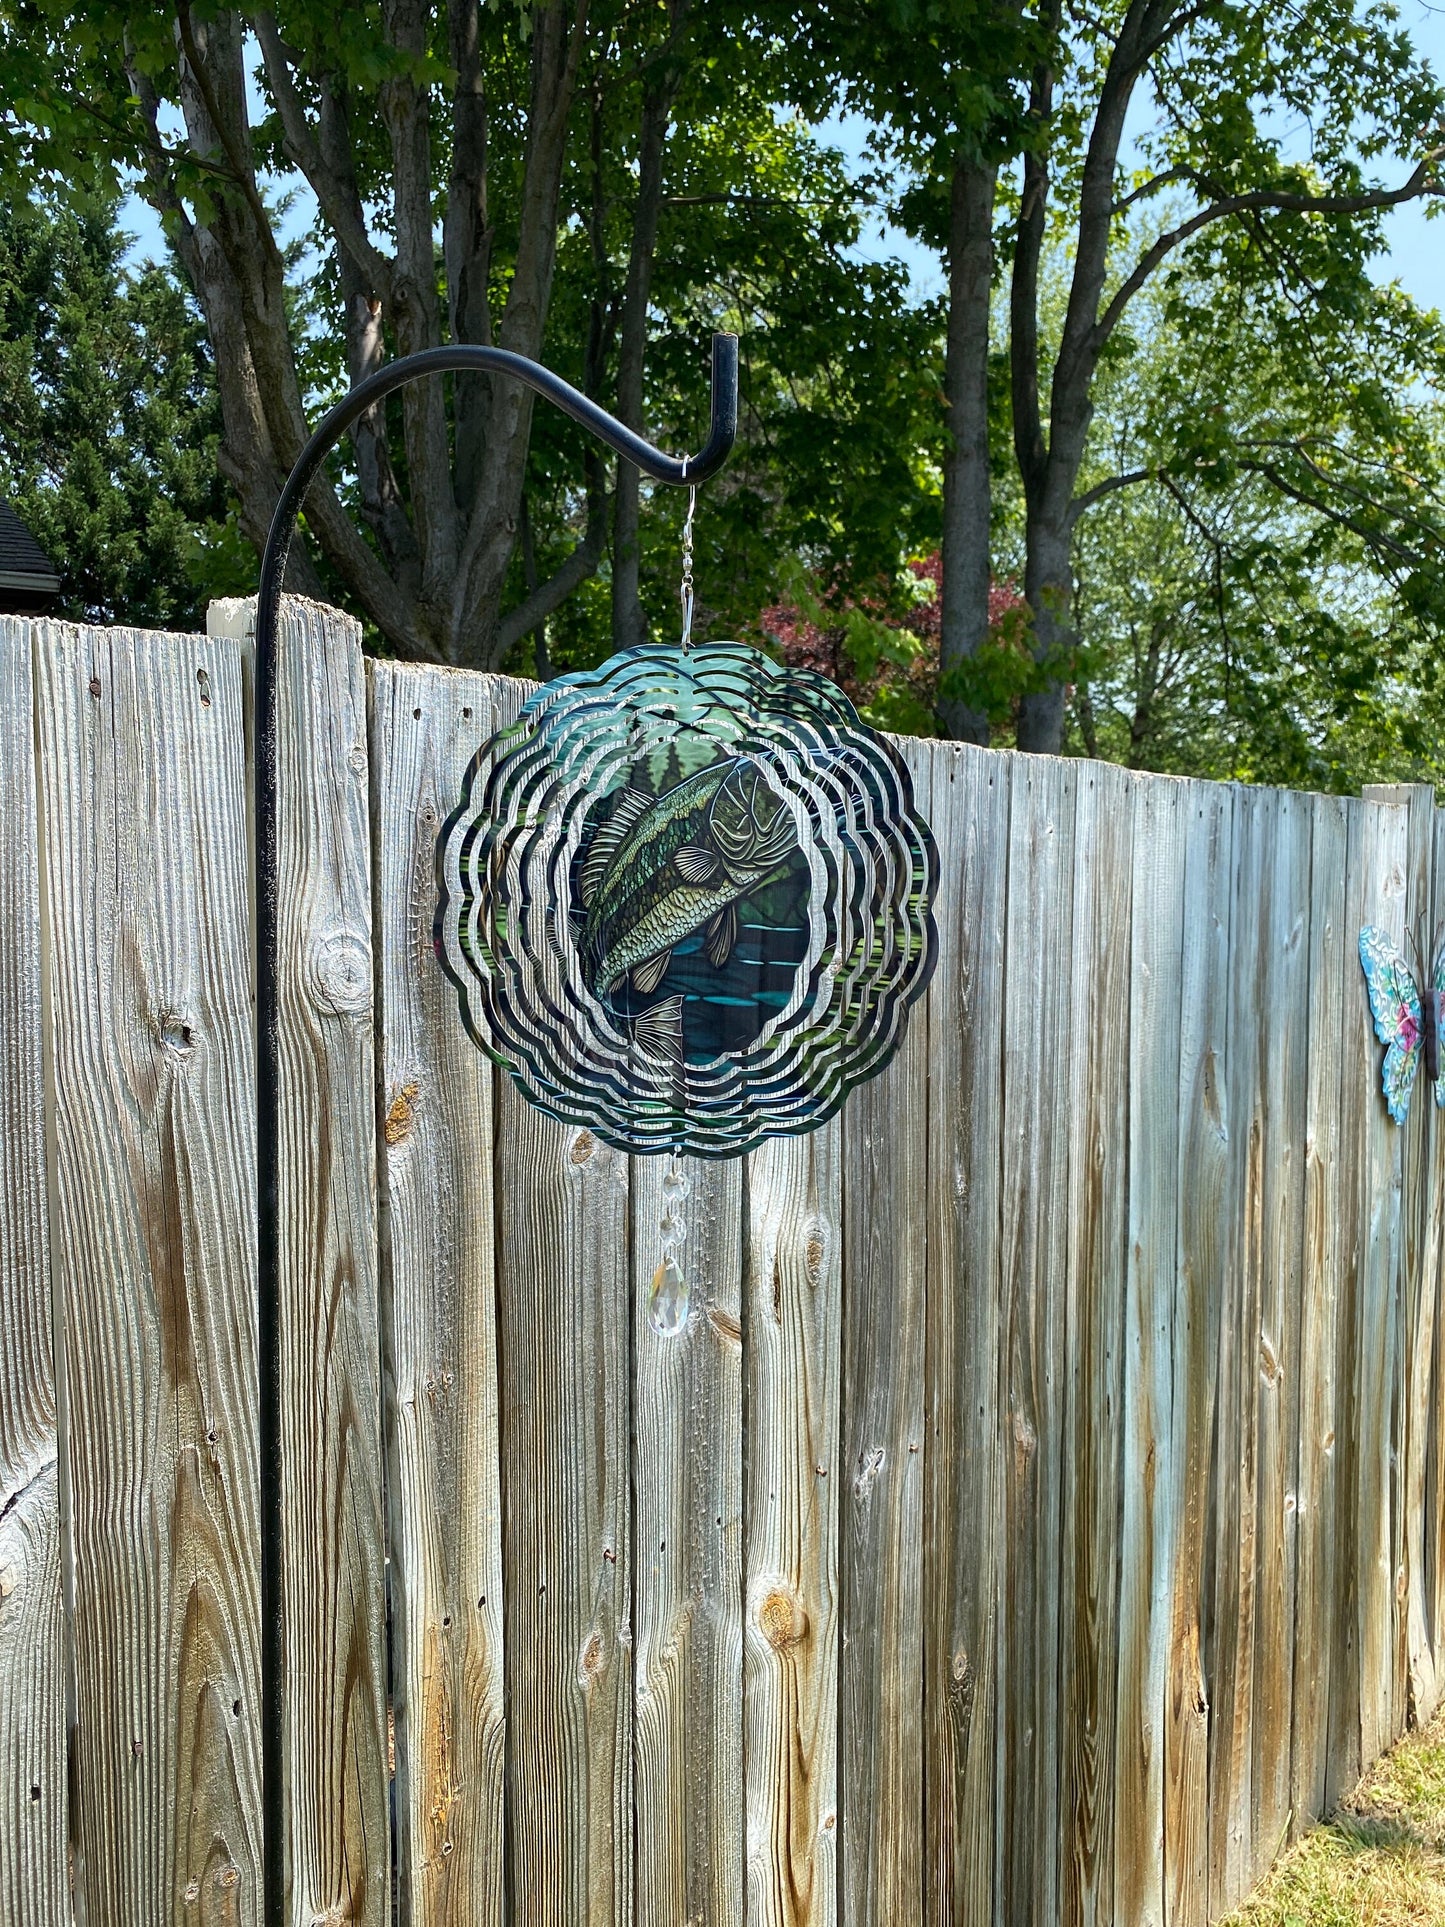 Bass Wind Spinner, Fishing Stained Glass Look Wind Spinner, Camping Outdoor Decor, Father's Day Gift, Yard Art Sun and wind Catcher